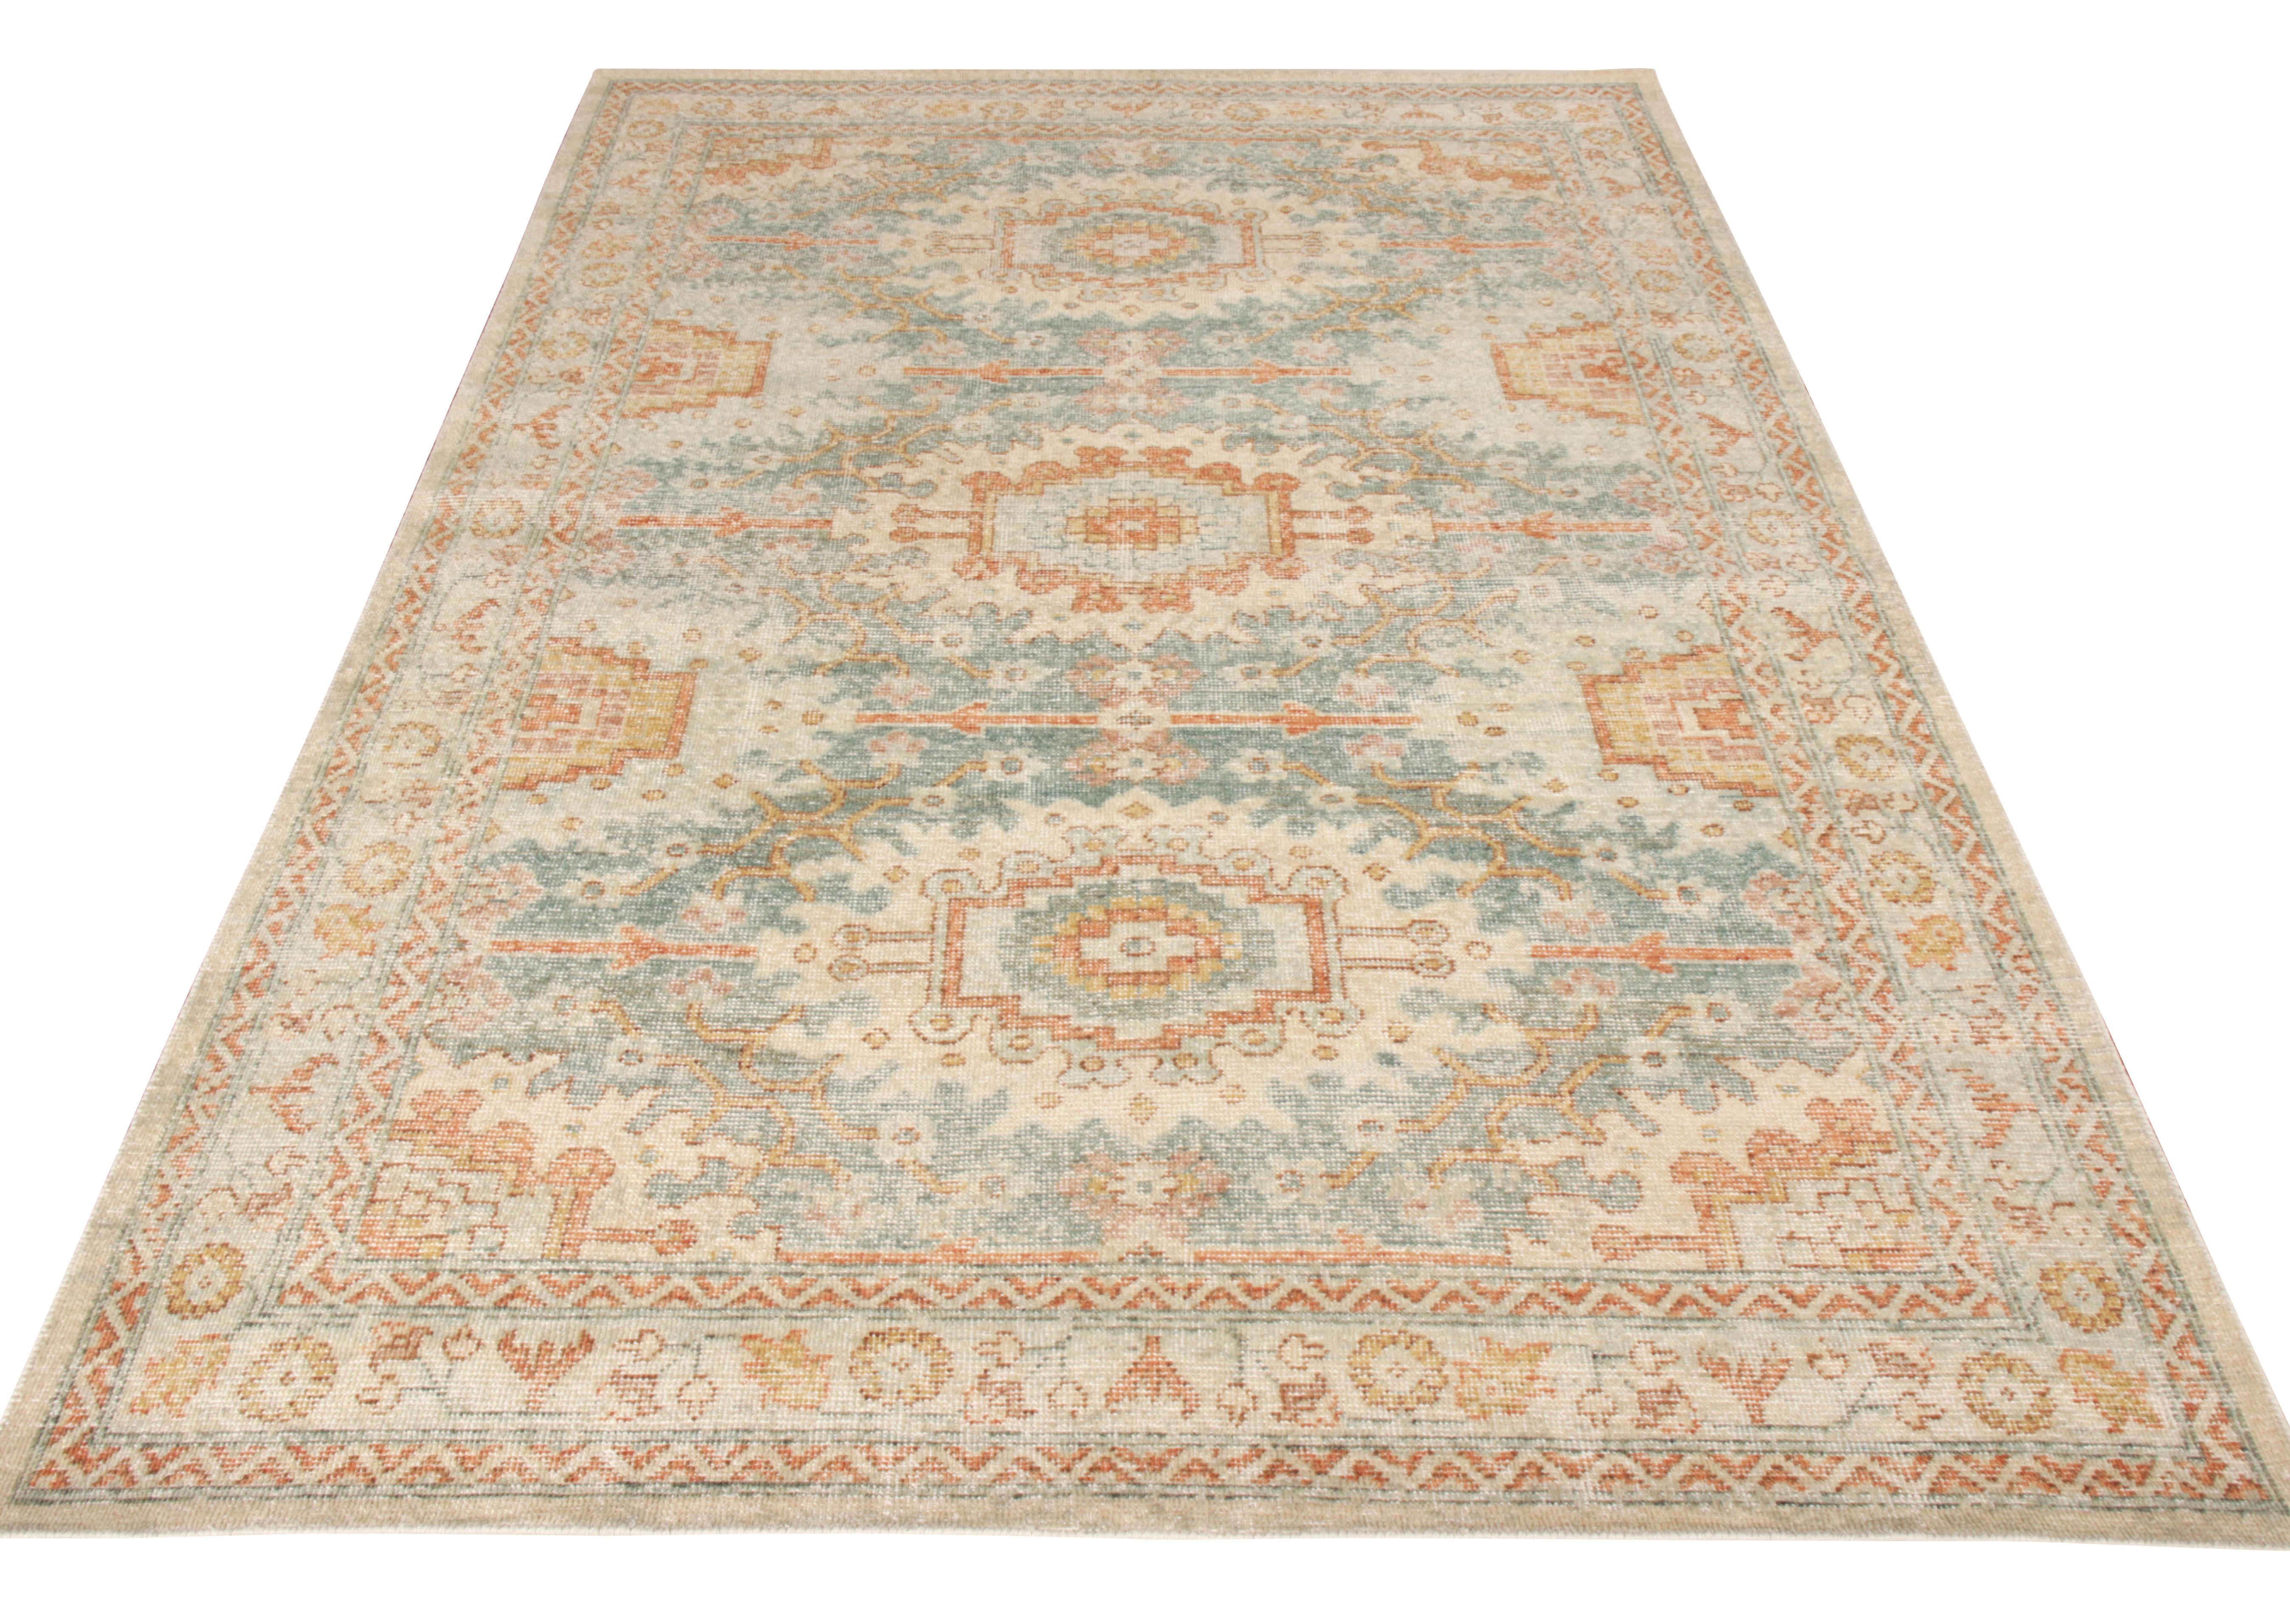 Hand knotted in wool, an ode to classic style, Rug & Kilim presents this custom rug from its Homage collection. A 6x9 piece of sheer magnificence, the rug makes a distressed take on traditional style while filling the field with a dense geometric